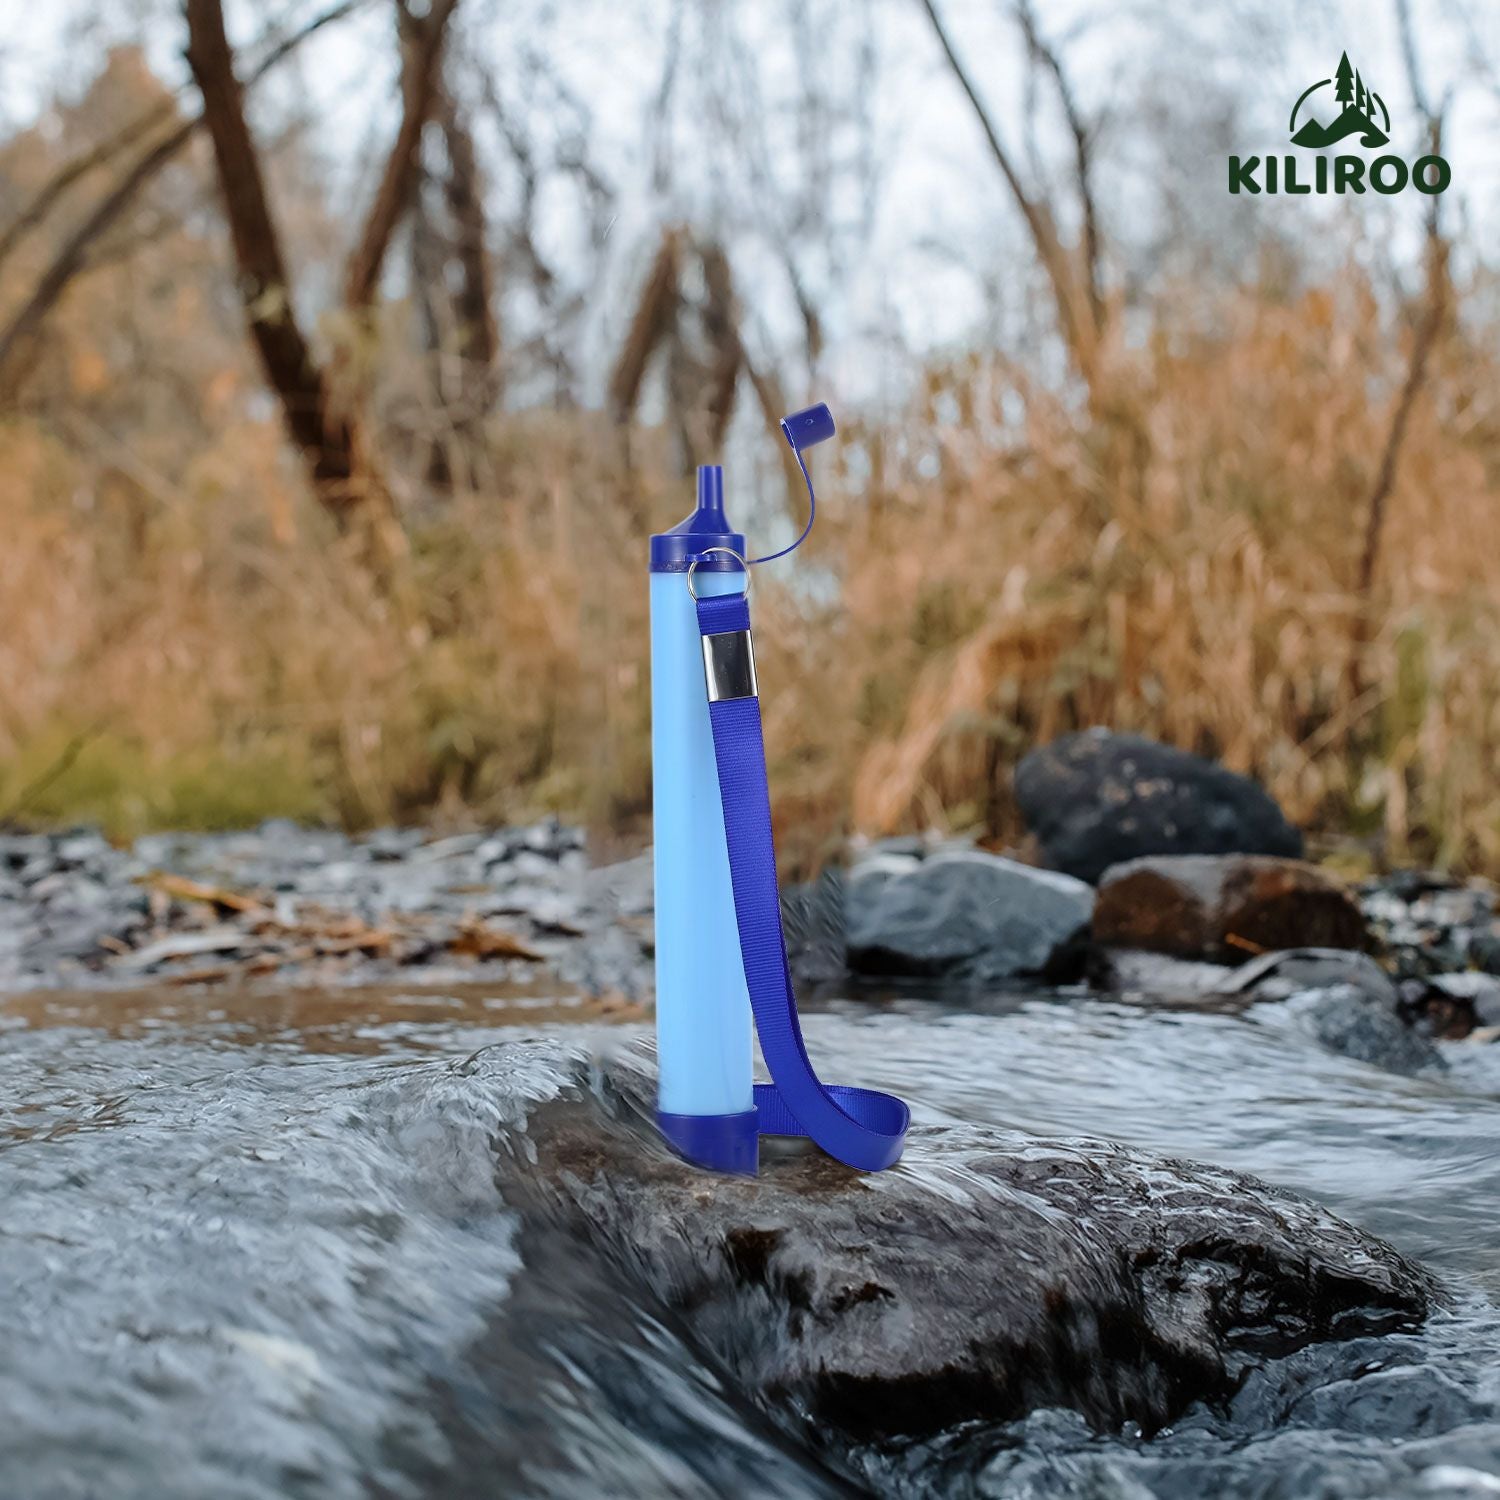 Water Filter, Ultralight and Durable, Long-Lasting Up to 1500L Water, Easy Carry